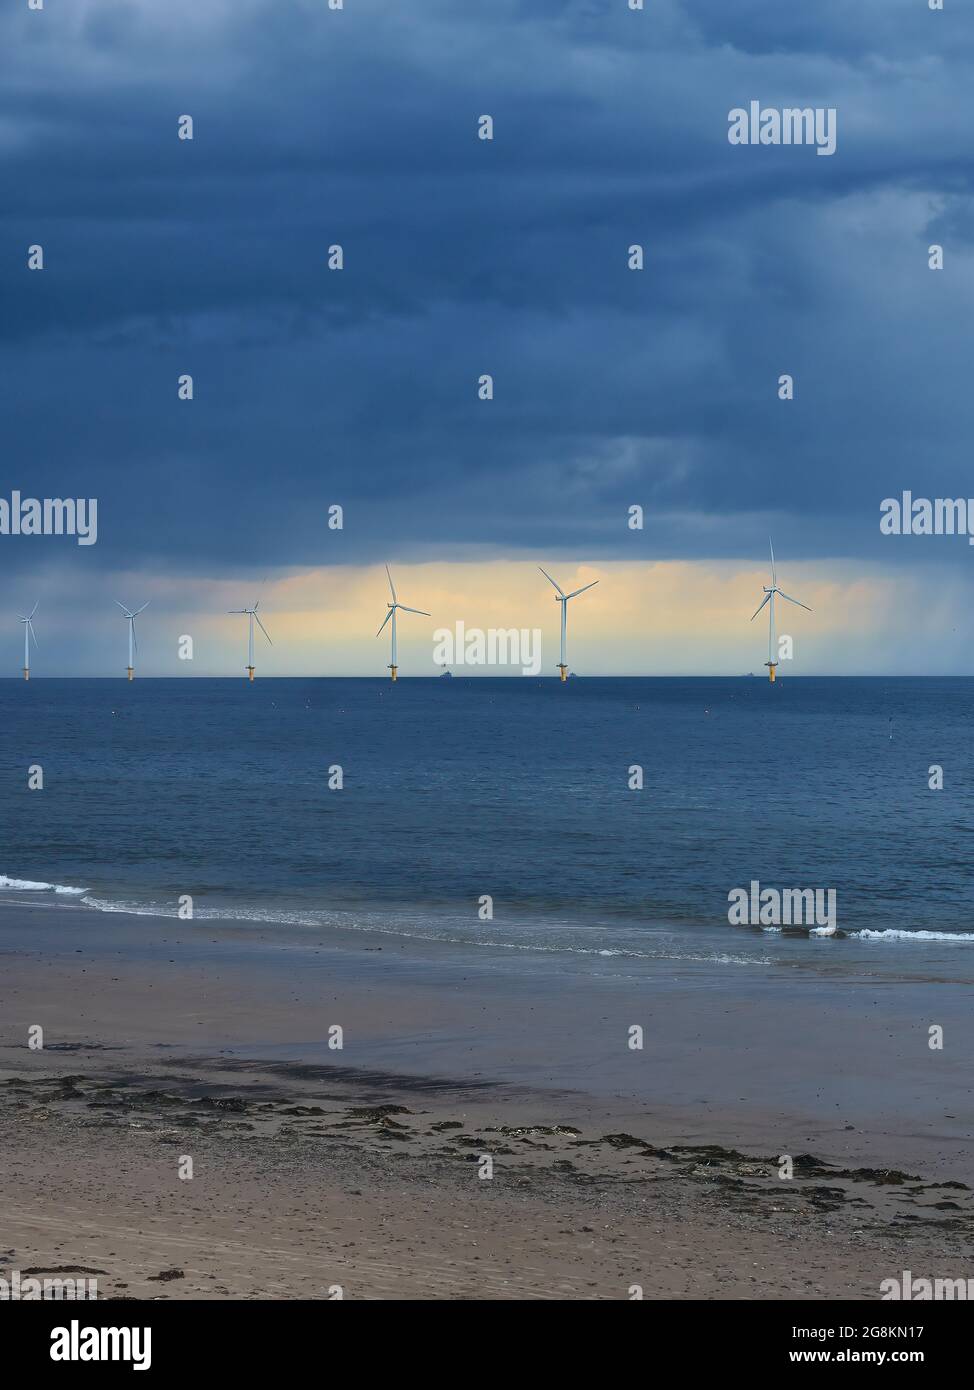 The near-shore wind farm at Redcar Beach, ahead of sunlit rent in an ominous, stormy sky, with the rolling waves of the North Sea as foreground. Stock Photo